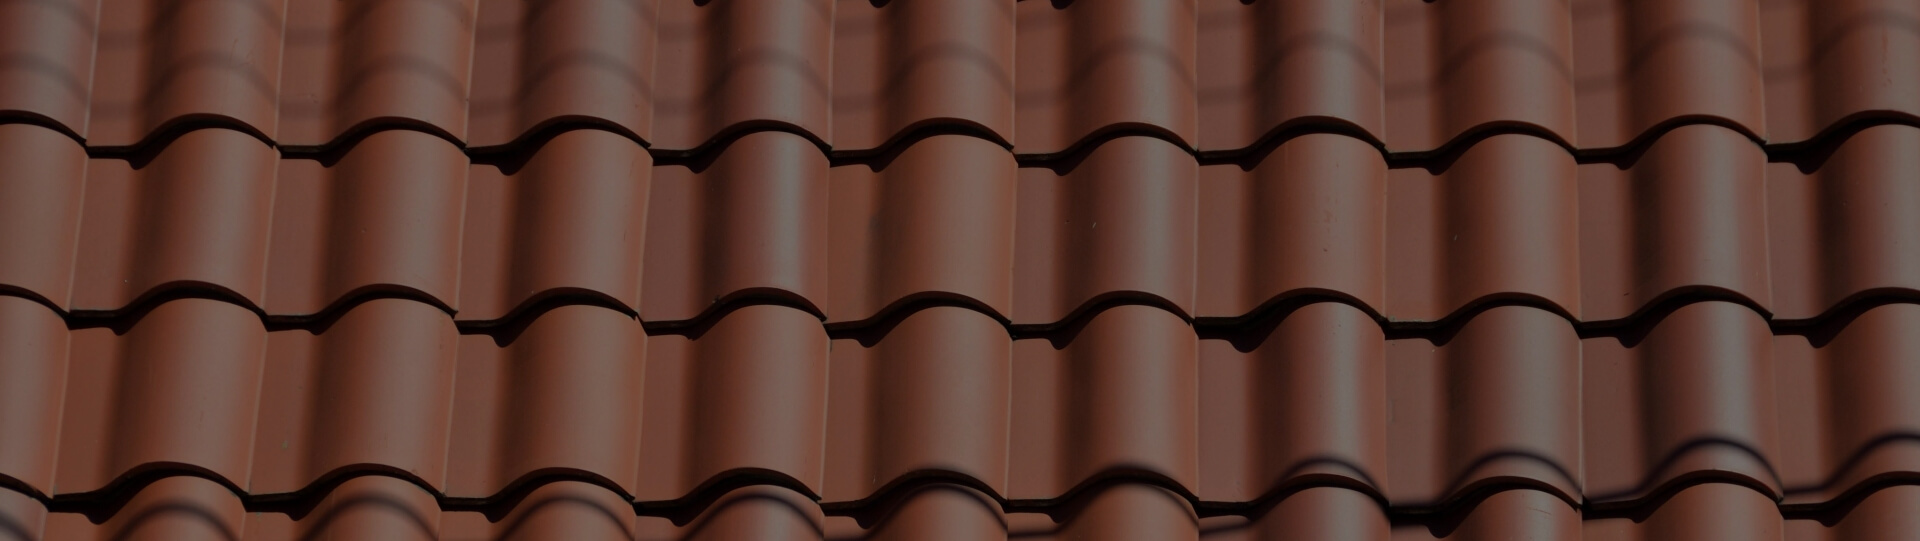 Close up of red tile shingles